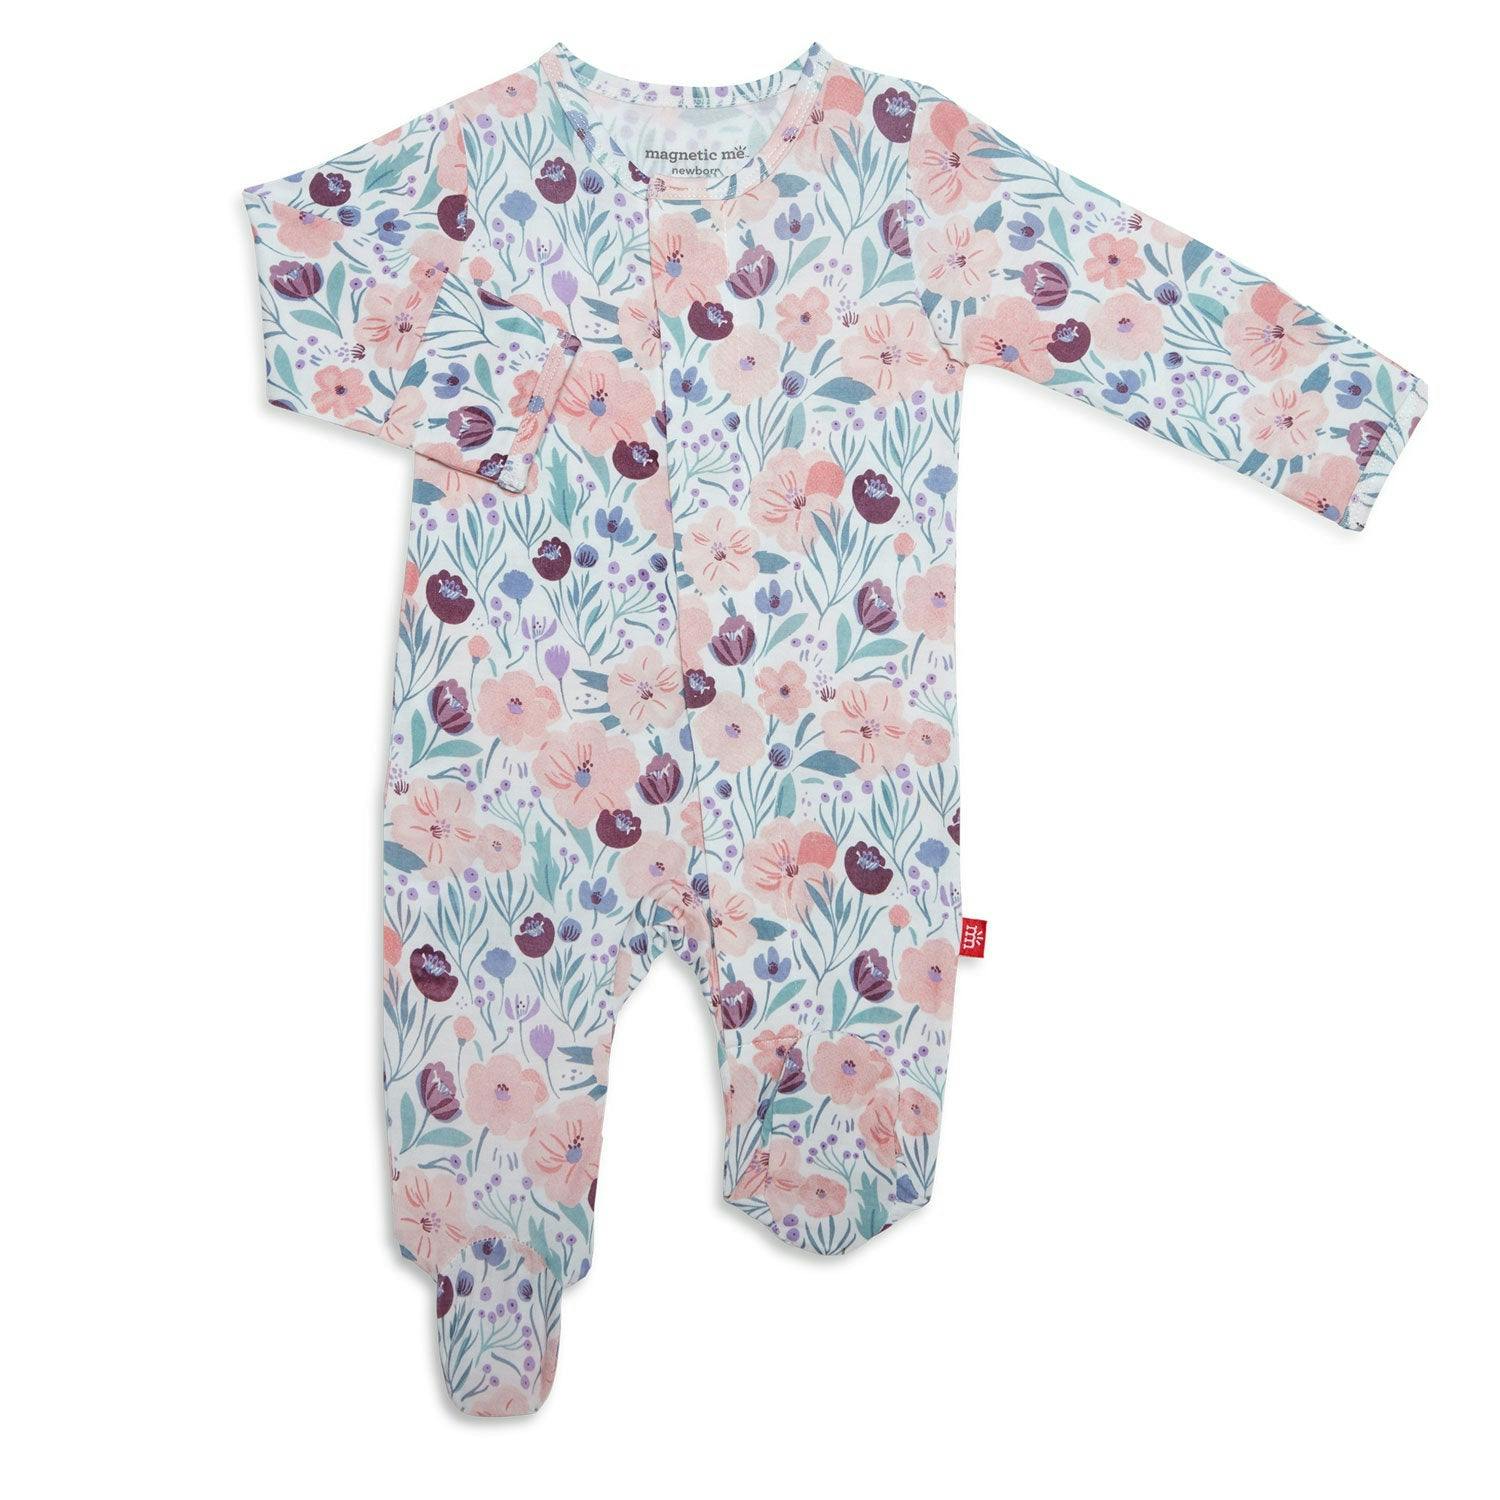 Magnetic Me Modal Footie Whistledon · 0/3 months